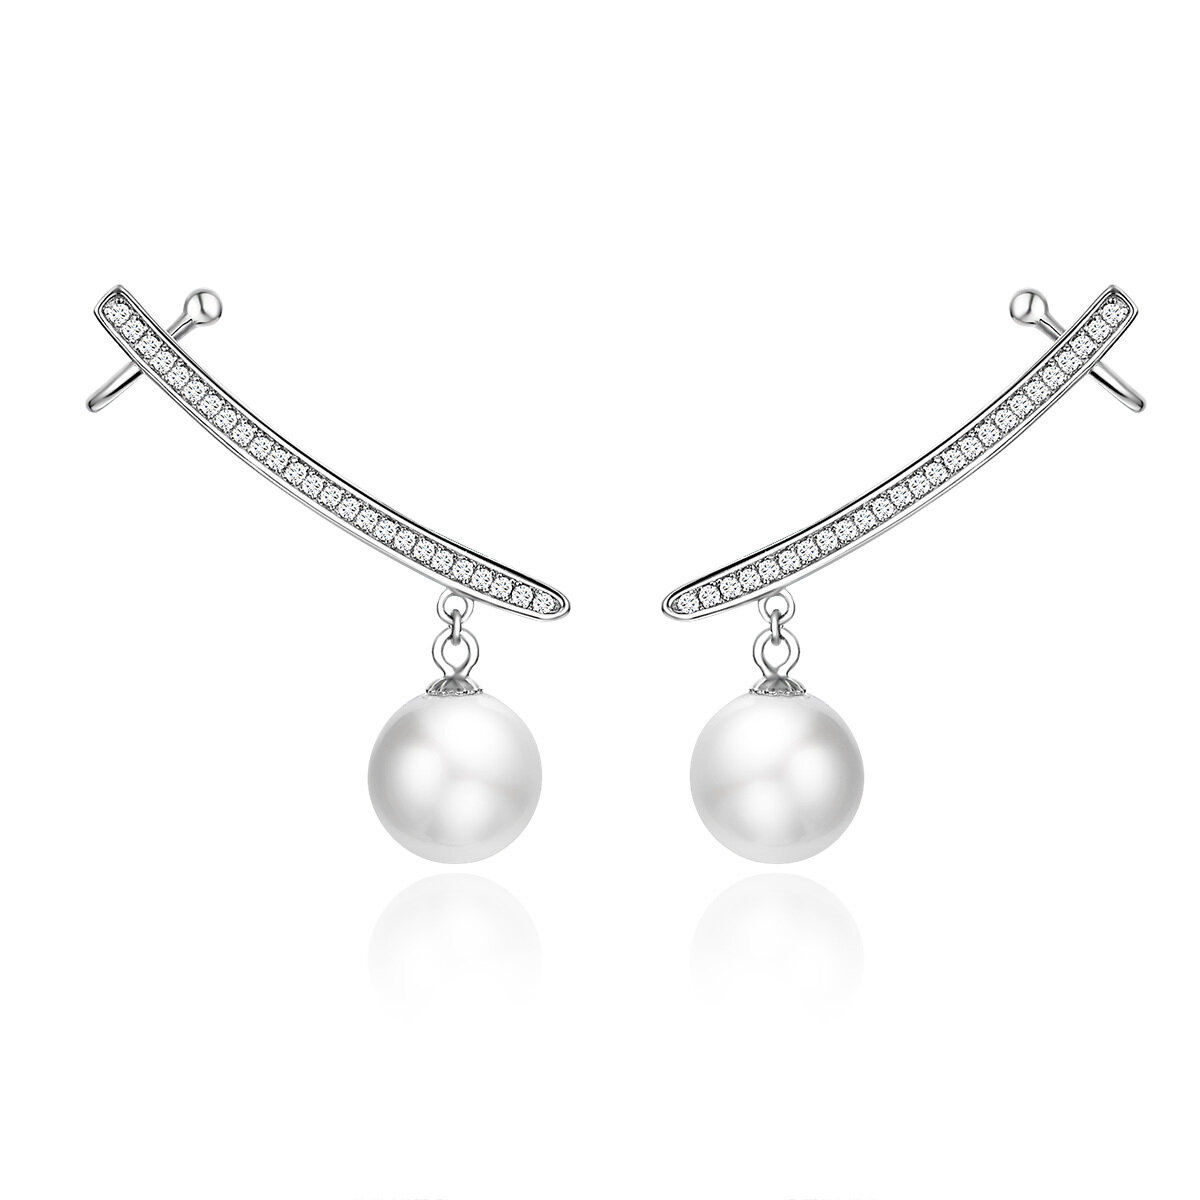 GemKing BSE299 the Pearl S925 Sterling Silver Earring